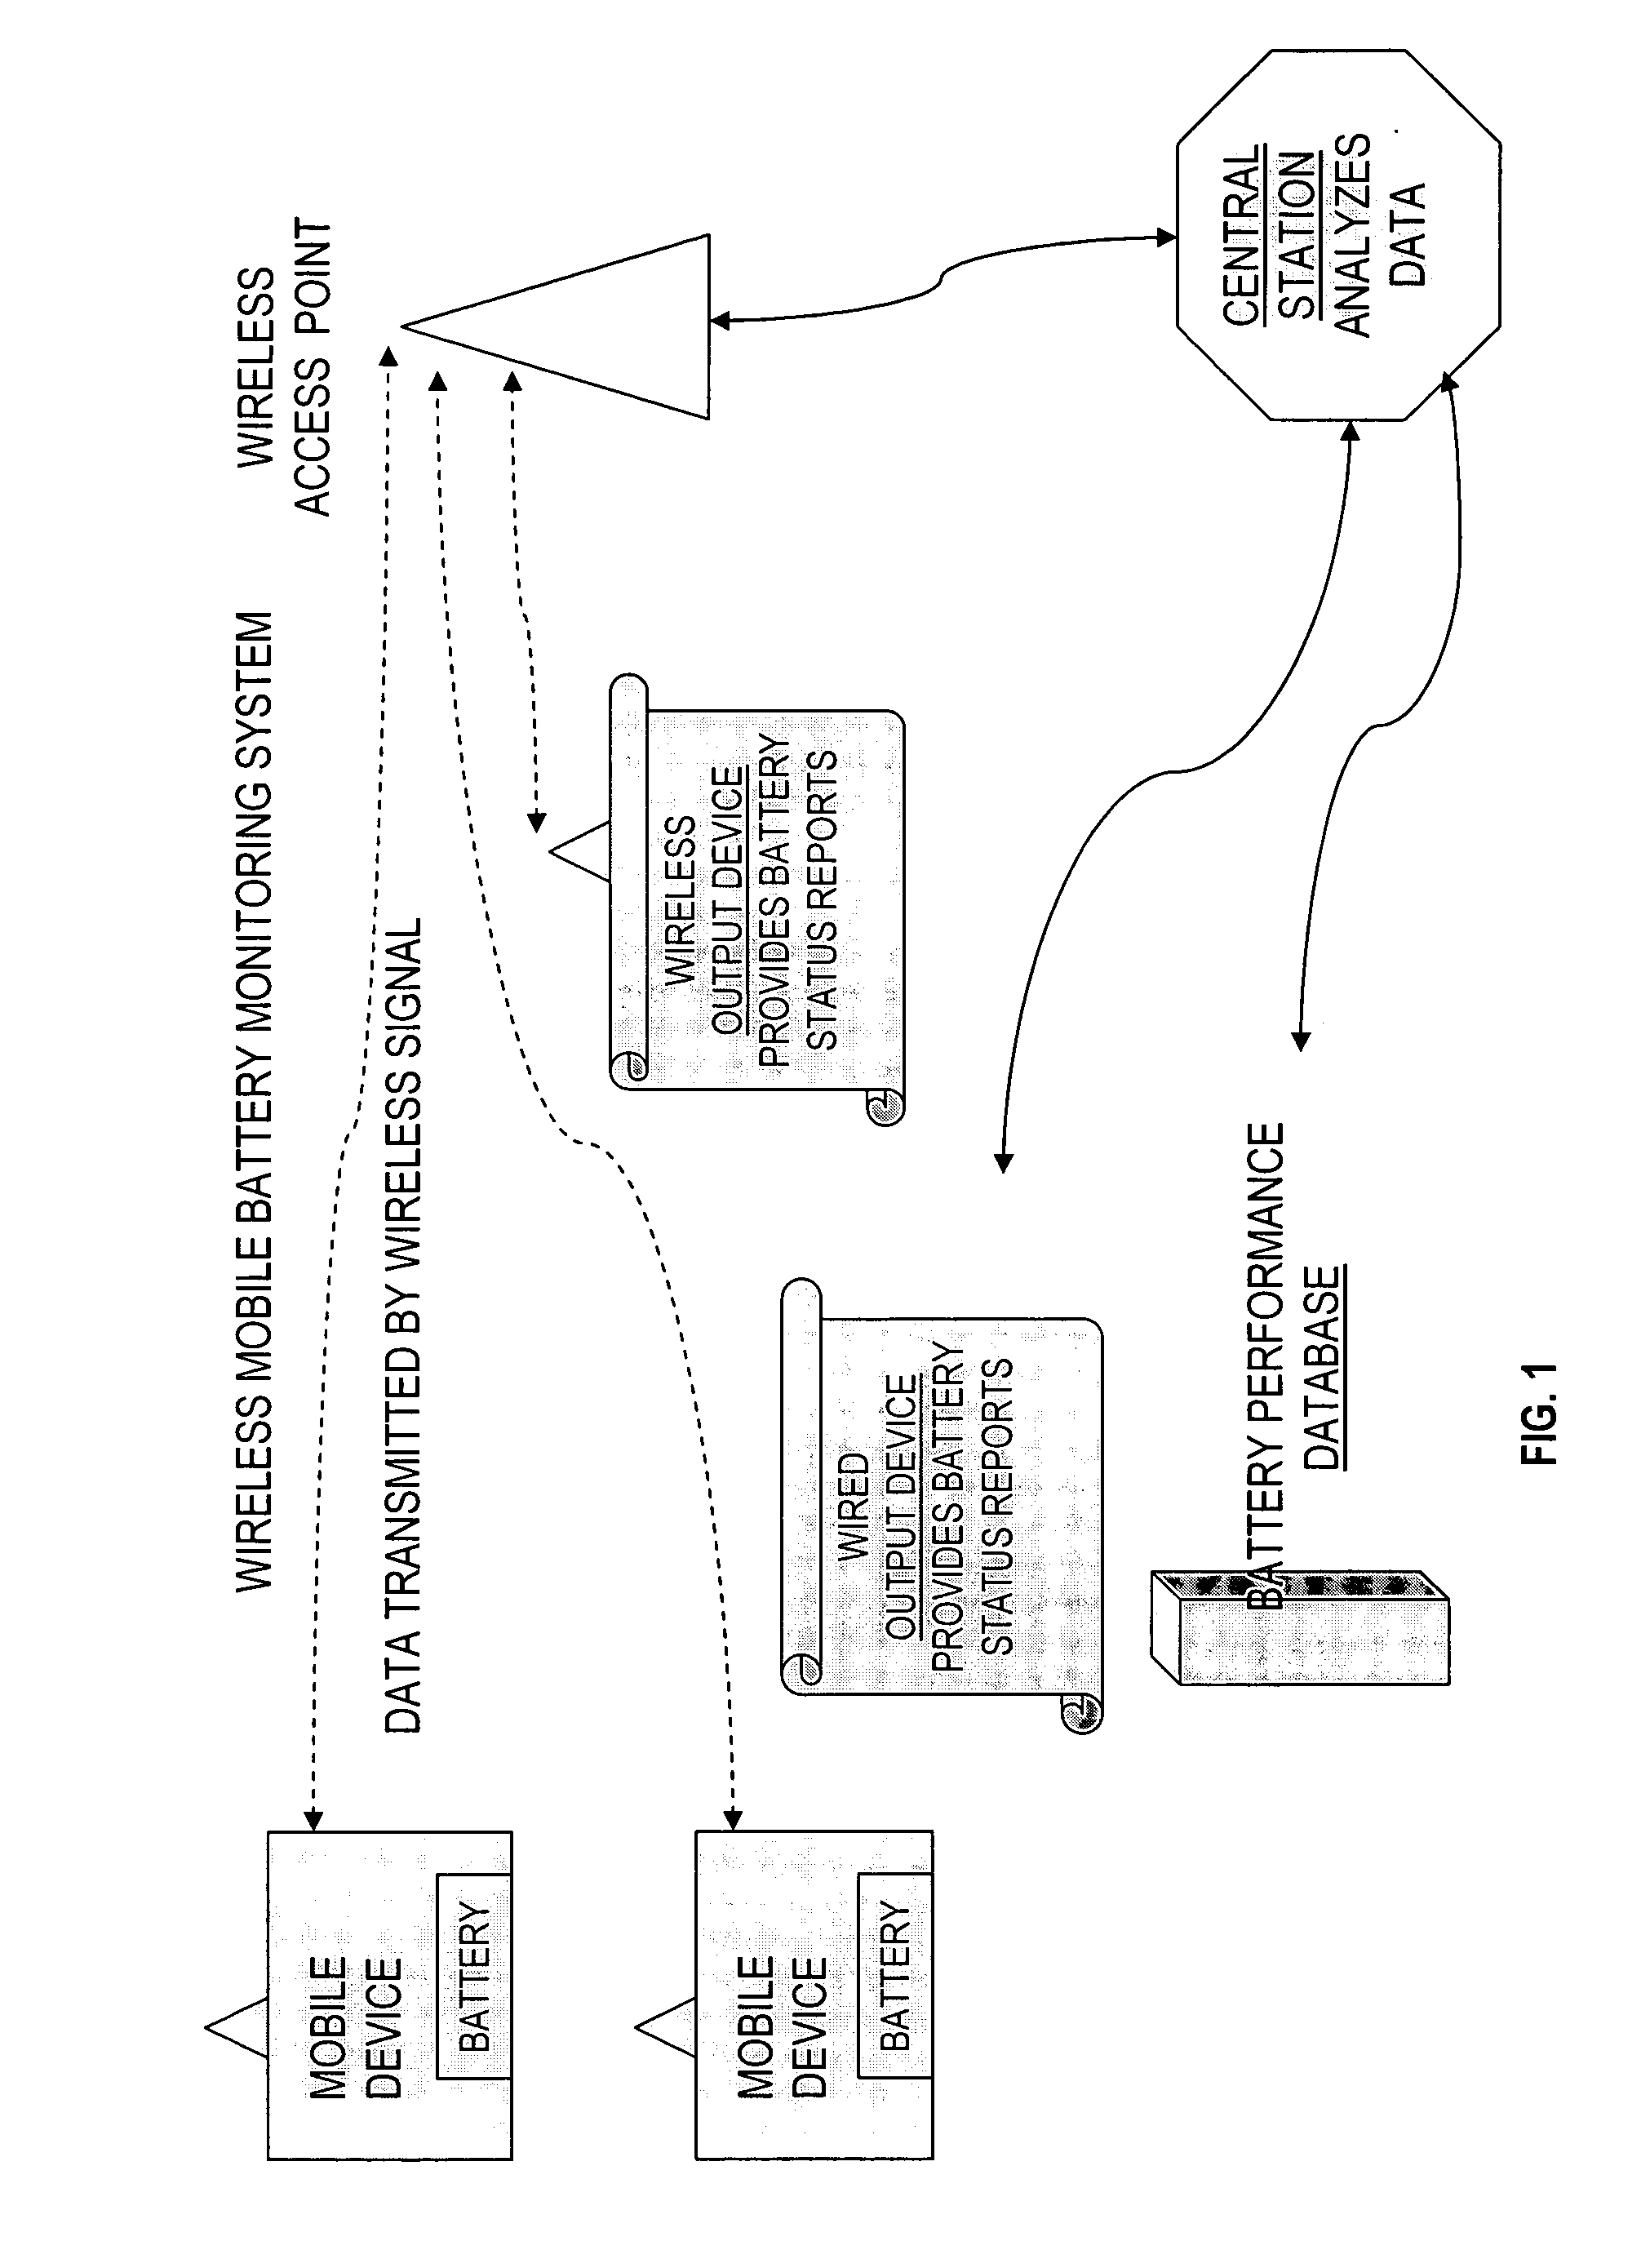 Wireless collection of battery performance metrics system, method, and computer program product